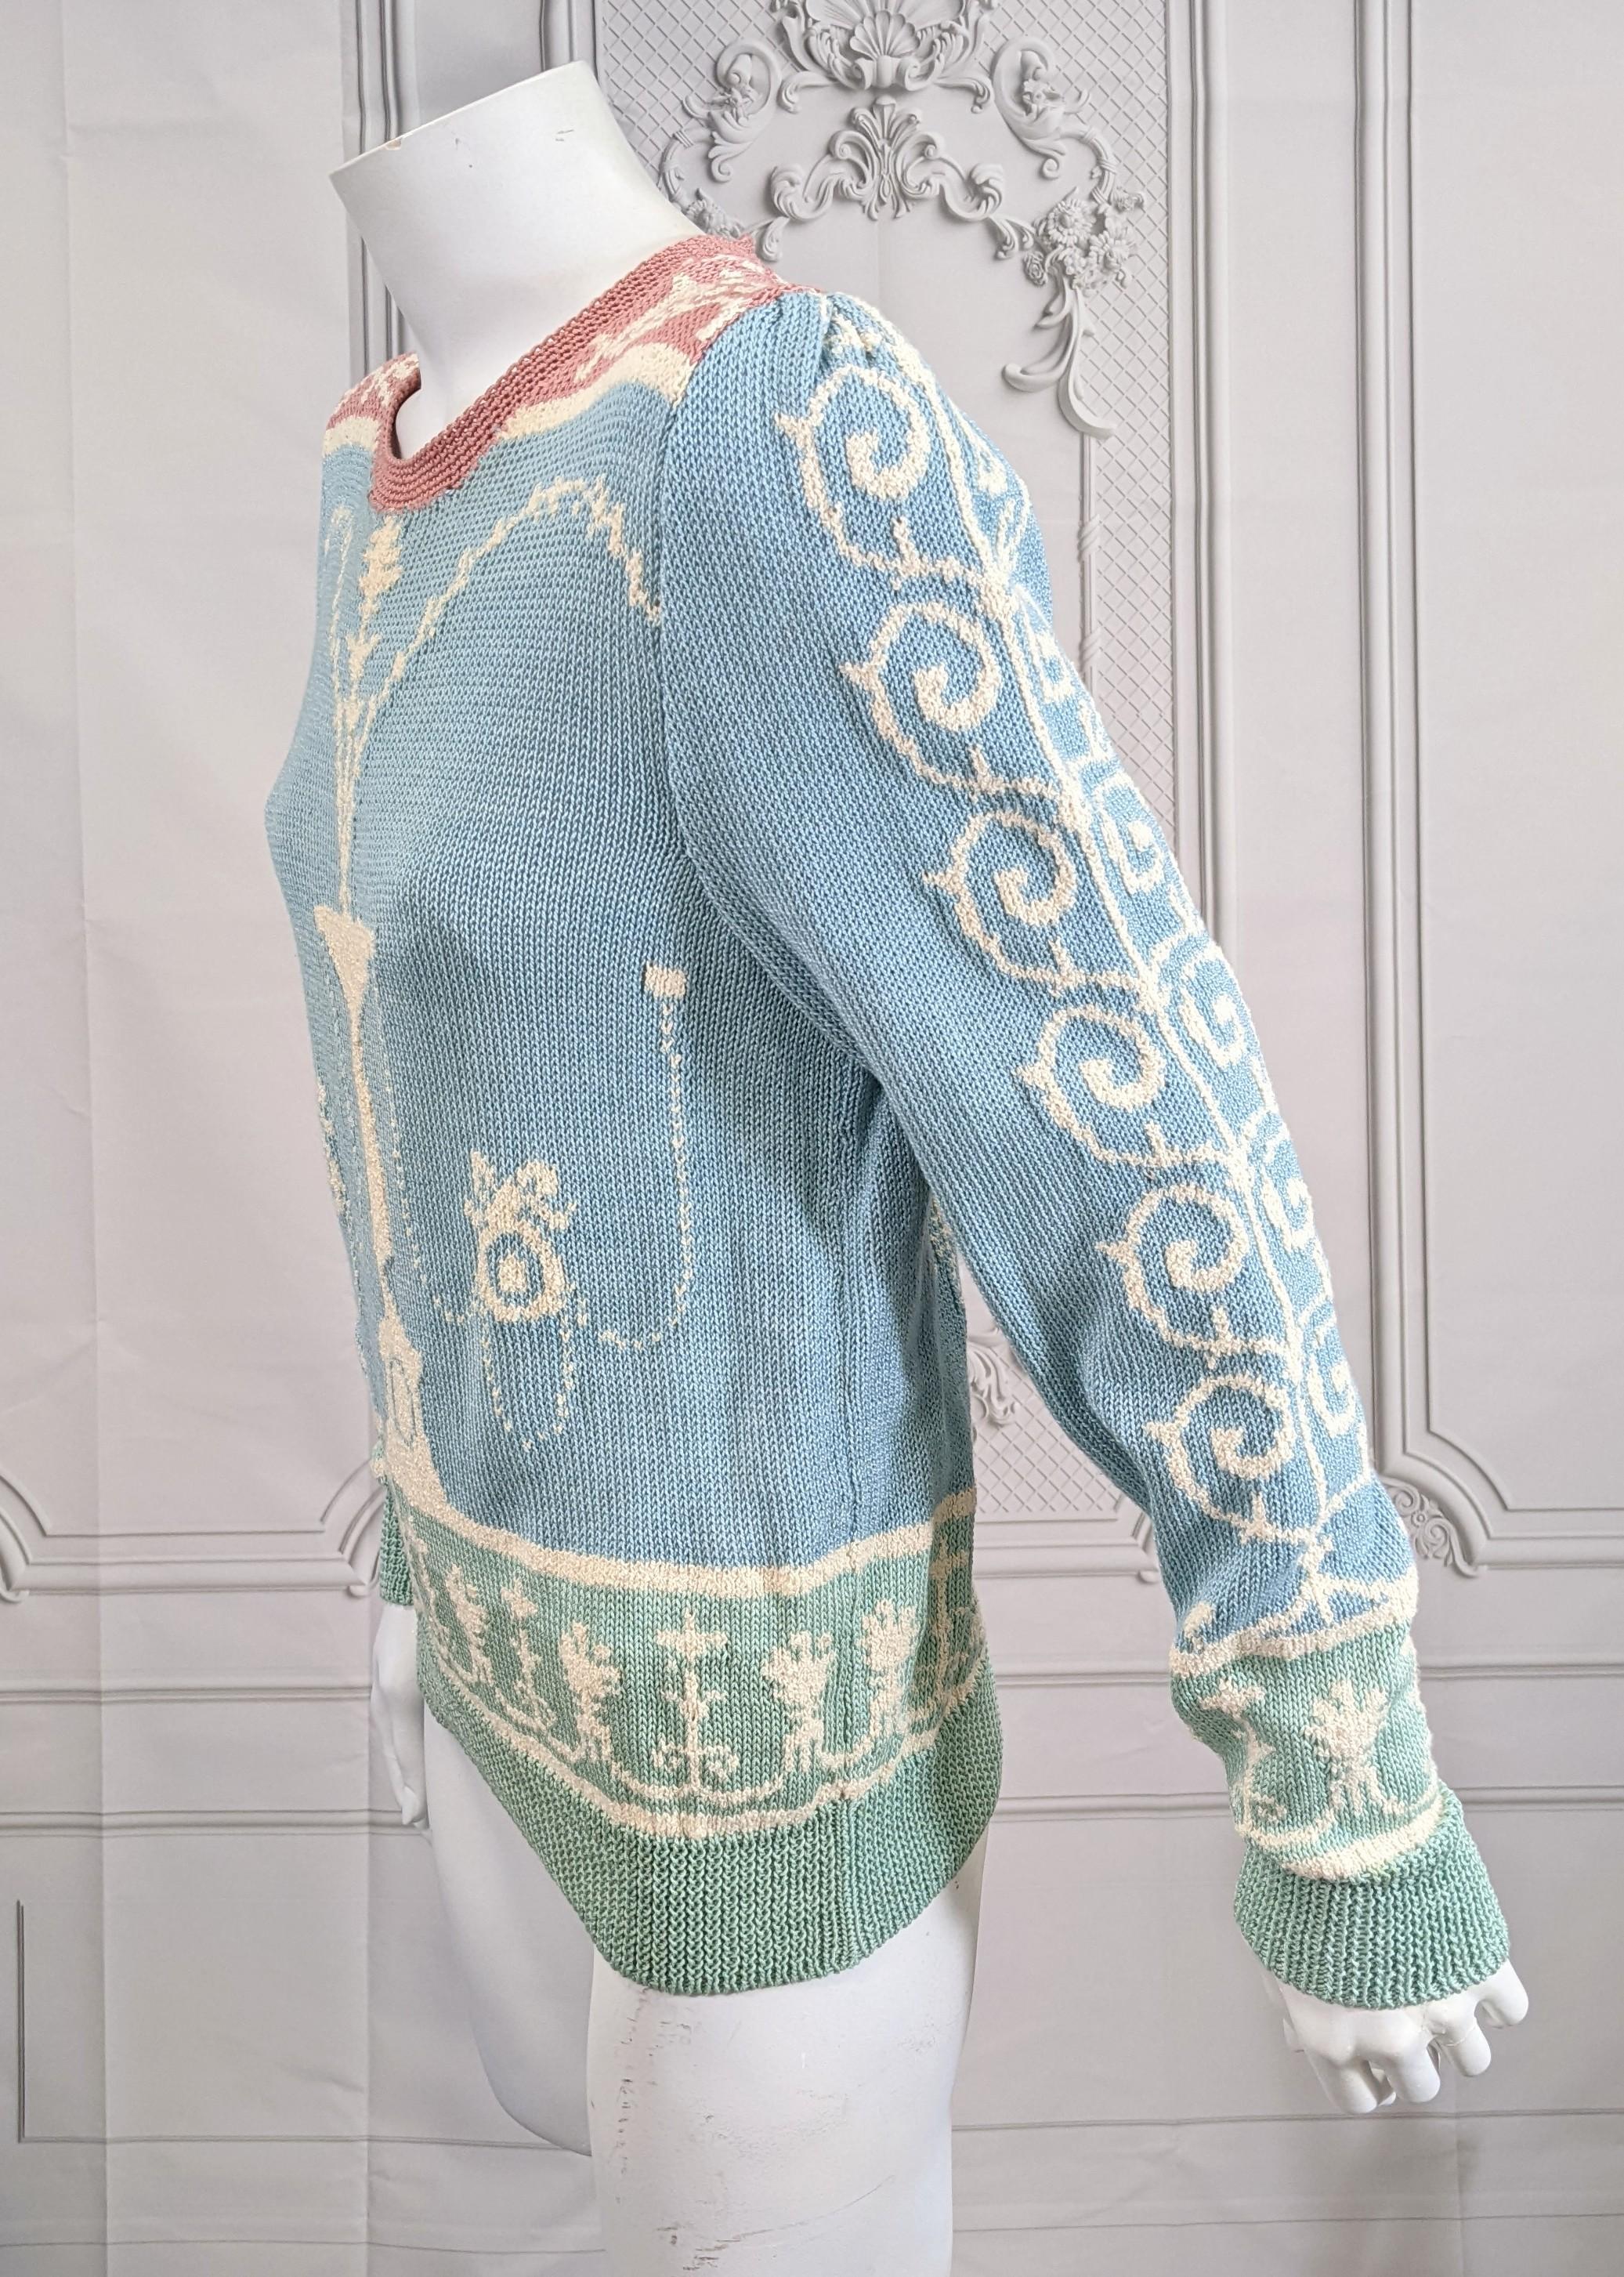 Handknit Cotton Sweater, Adams Style, Dia North of Boston In Excellent Condition For Sale In New York, NY